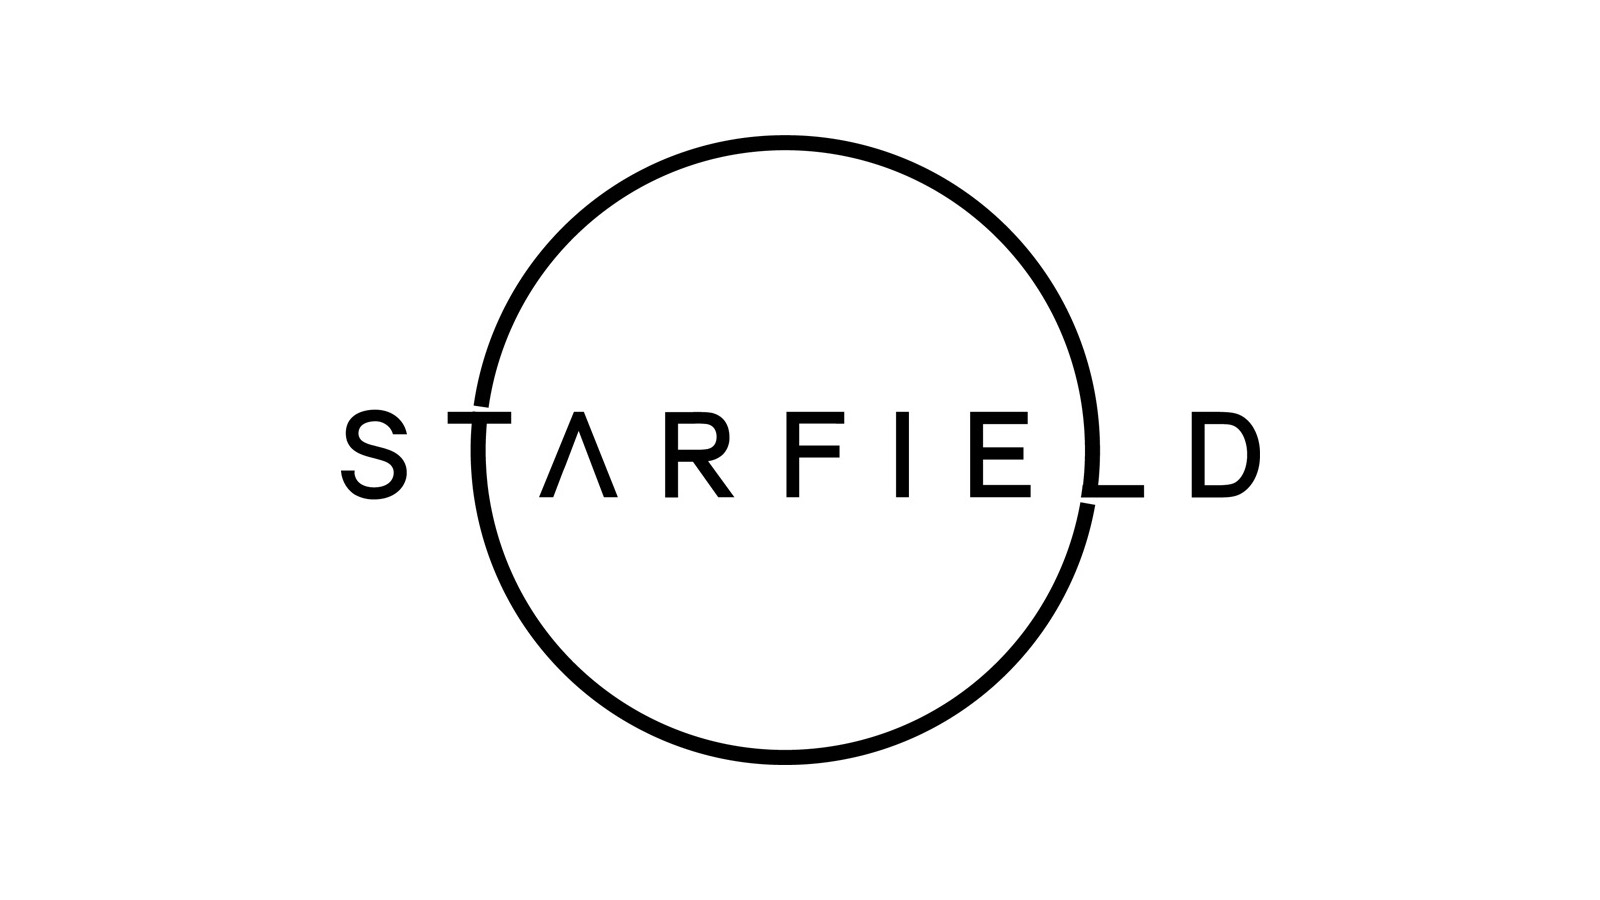 Major publications not asked to review 'Starfield' video game in